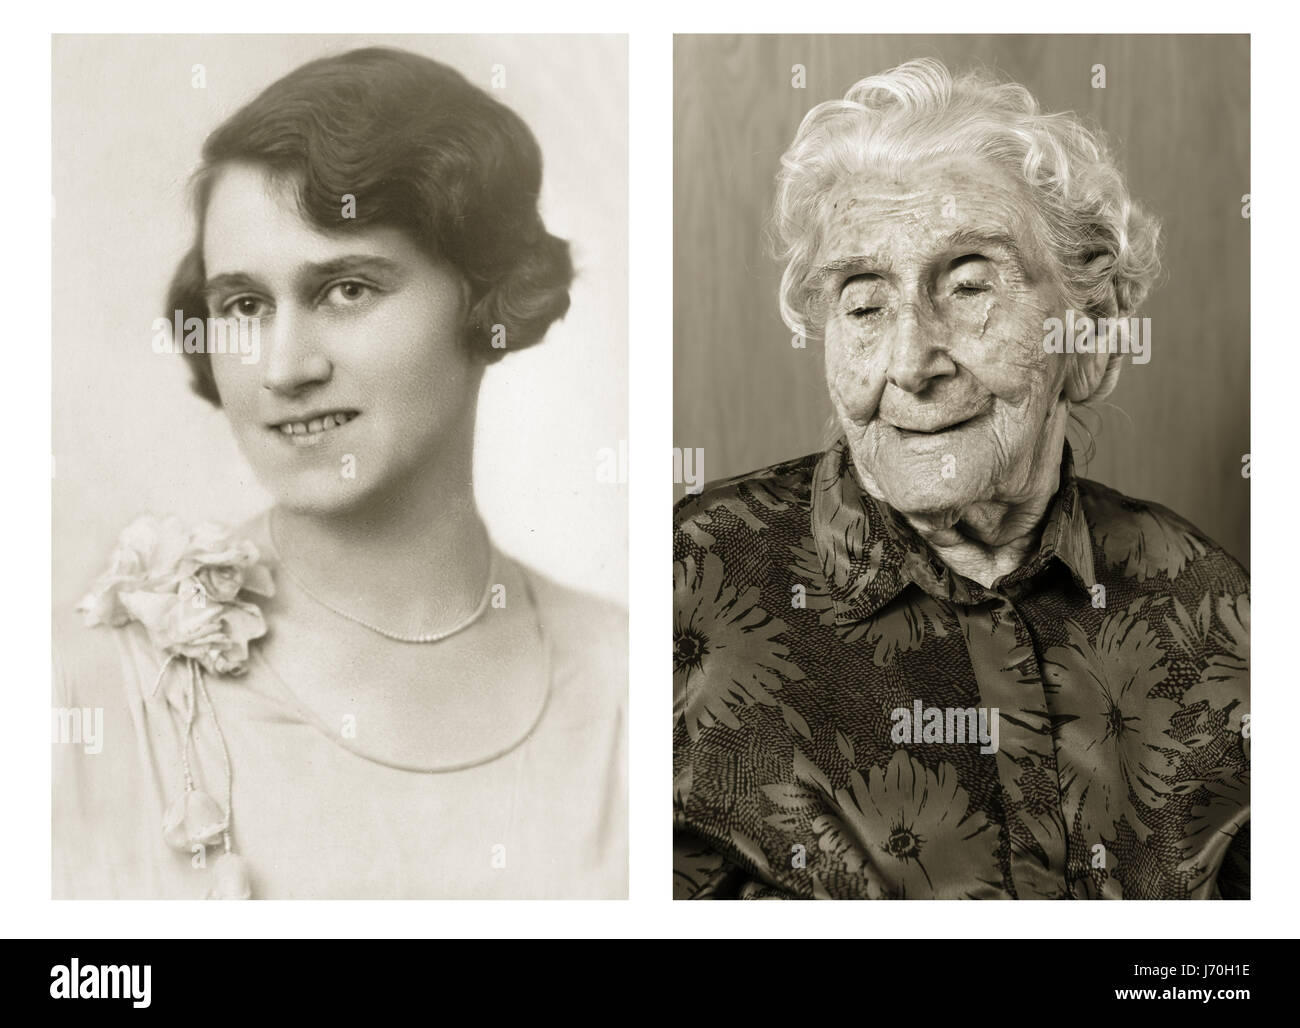 Bedřiška Köhlerová. Left: 26 years old, right: 103 years old. She was an accountant and now lives in retirement home in Brno. She wants to visit Italy one more time. POIGNANT portraits have posed centenarians alongside their younger selves in a project called Faces of Century. The incredible images tell the unique stories of each person’s life including one woman who was in the truck that hit and killed high-ranking German Nazi official Reinhard Heydrich’s son Klaus in 1943. Another intriguing tale comes from a 101-year-old woman who decided to leave her luxury villa after turning 101 and burn Stock Photo